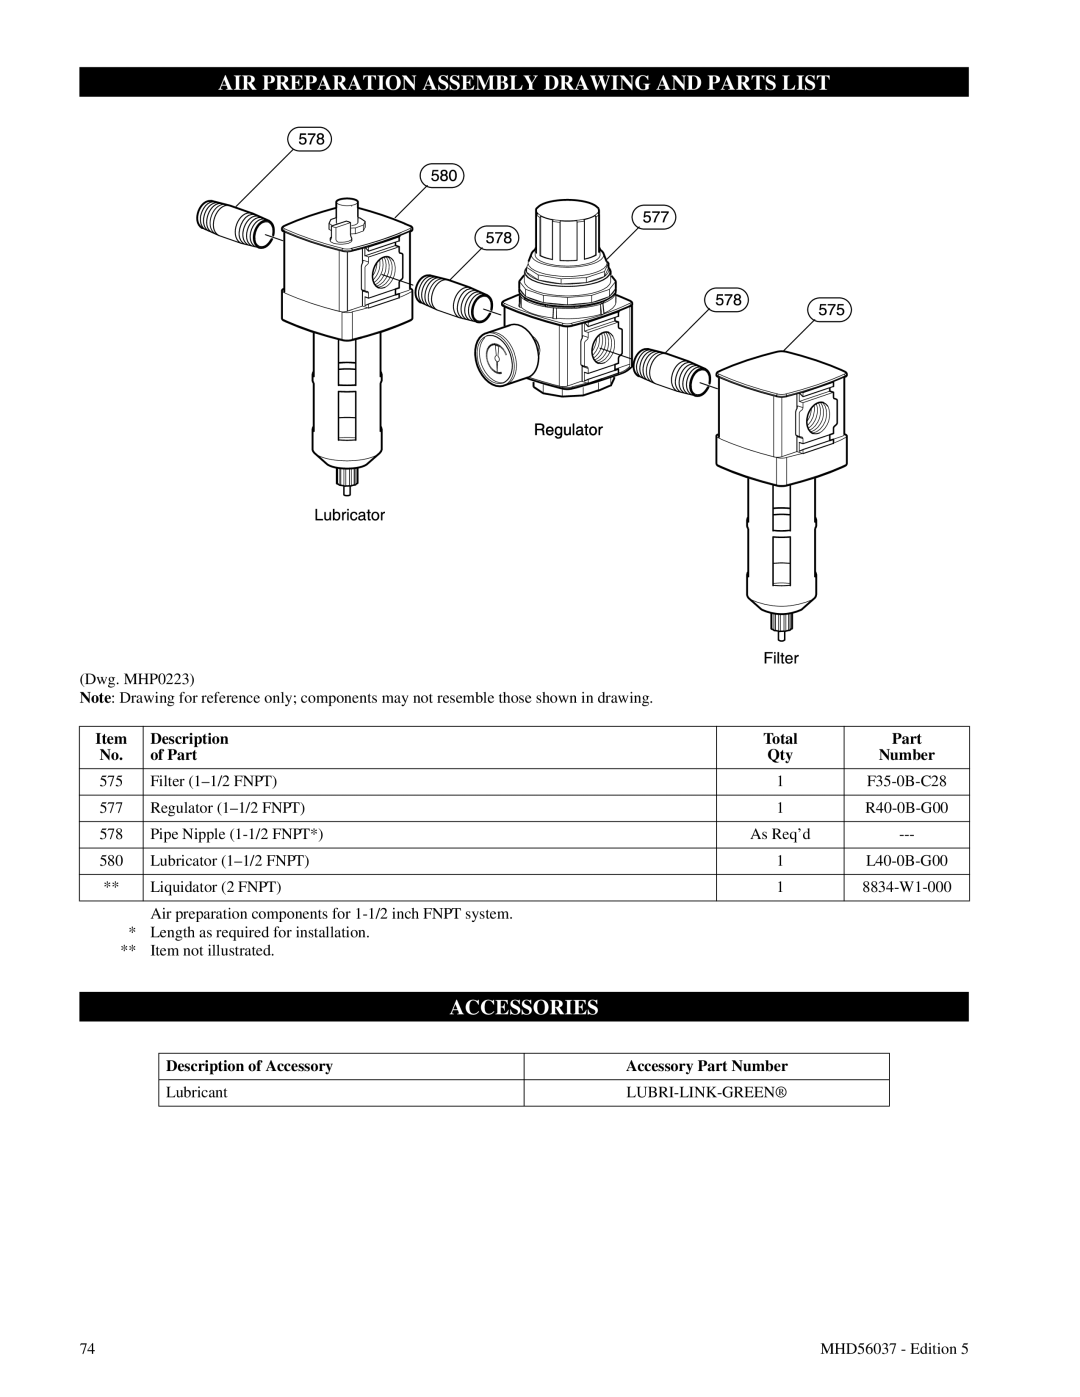 Ingersoll-Rand FA5 Air Preparation Assembly Drawing And Parts List, Accessories, Description, Total, of Part, Lubricant 